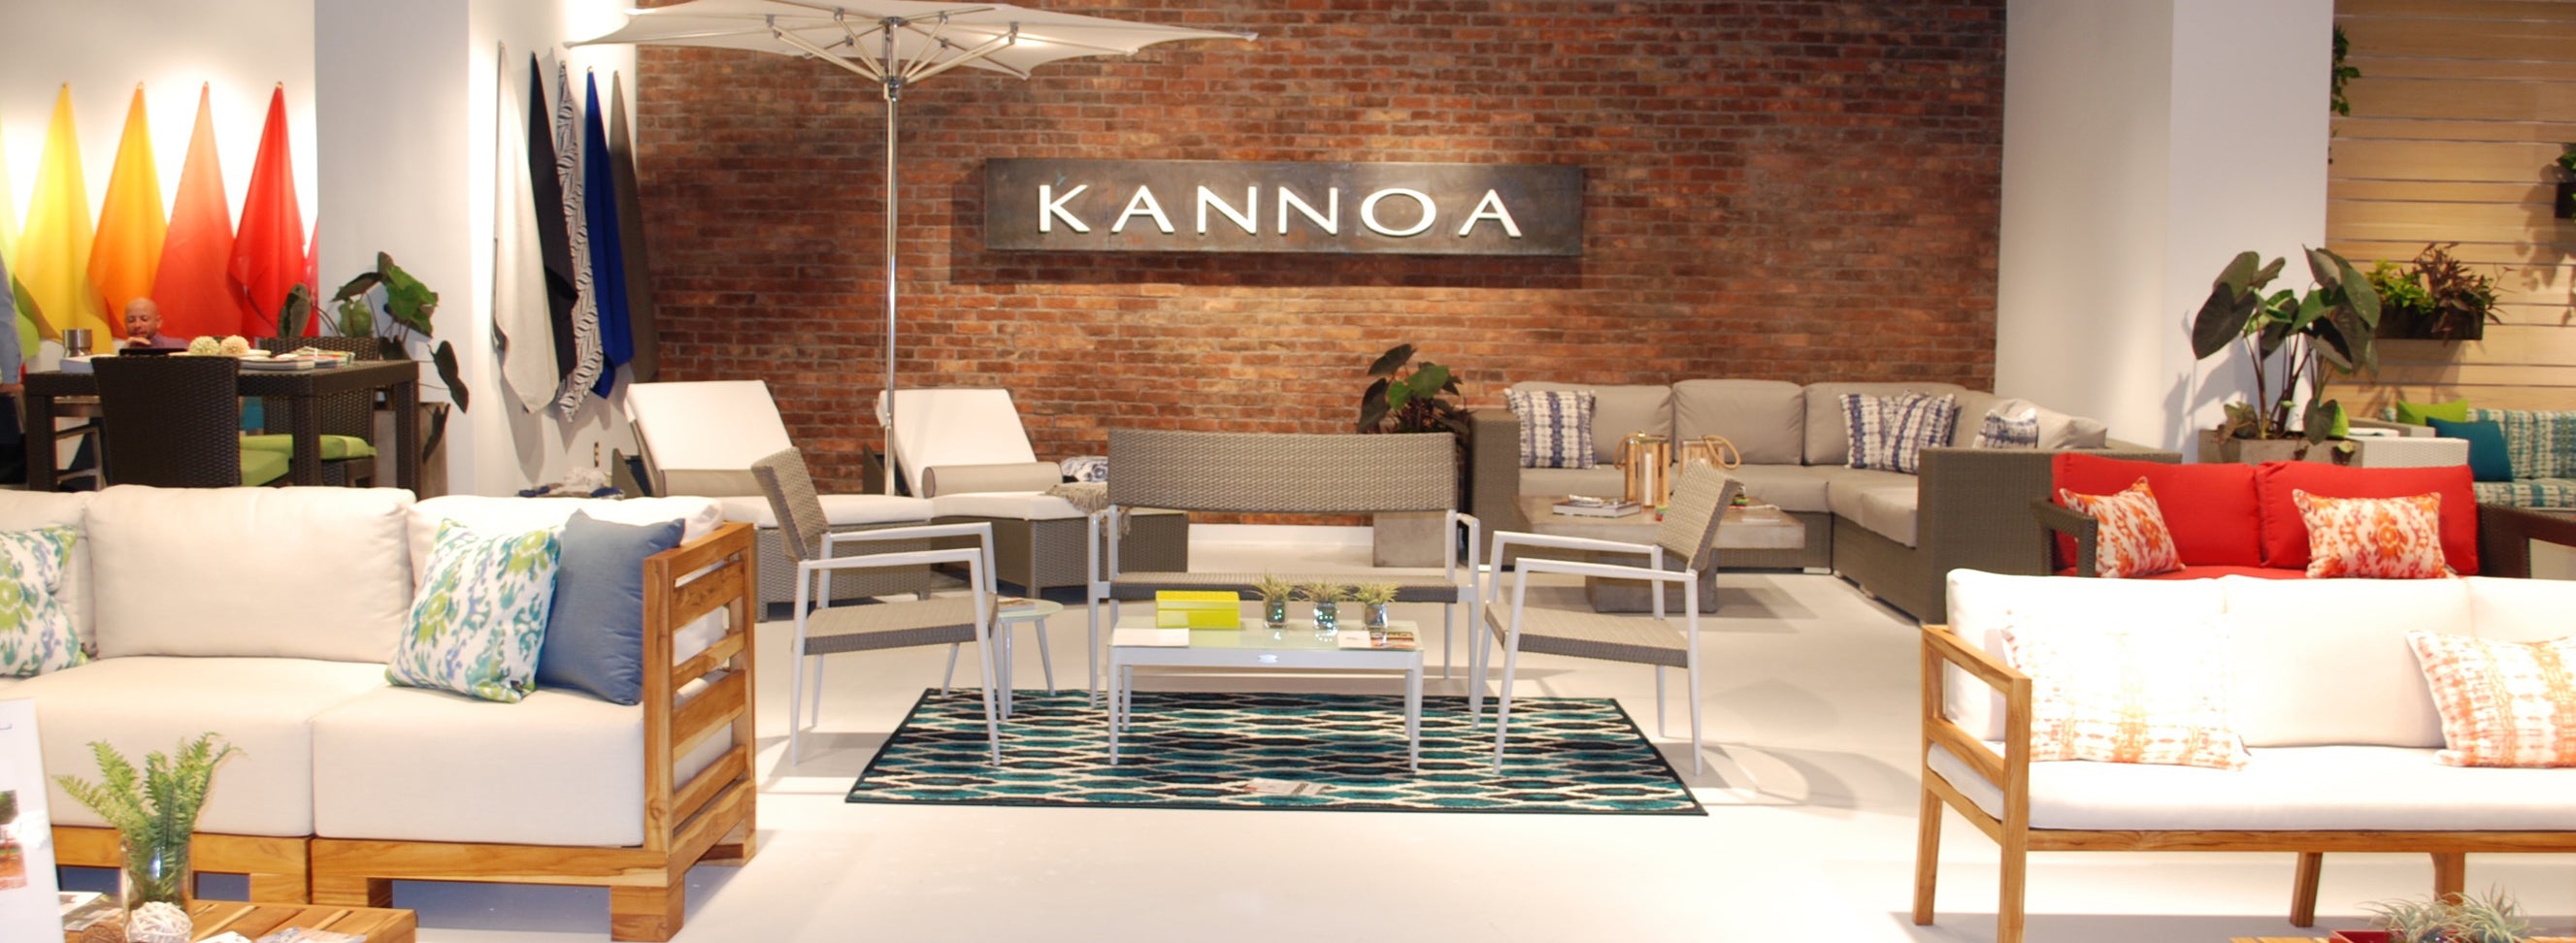 Trade Shows Kannoa Simply Outdoor And Patio Furniture